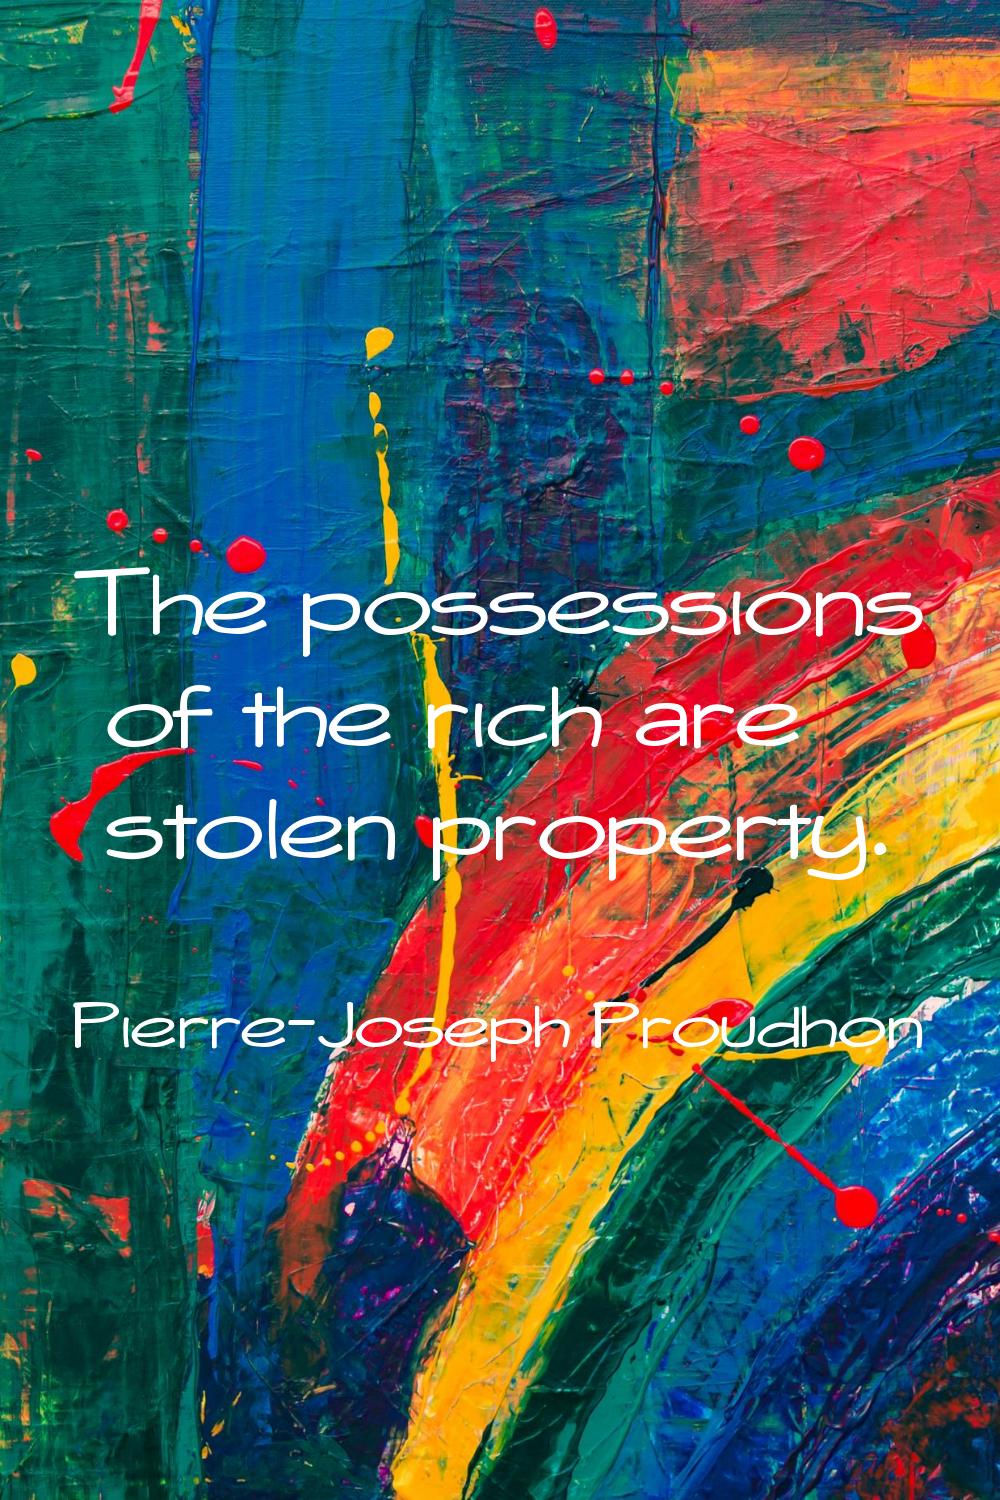 The possessions of the rich are stolen property.